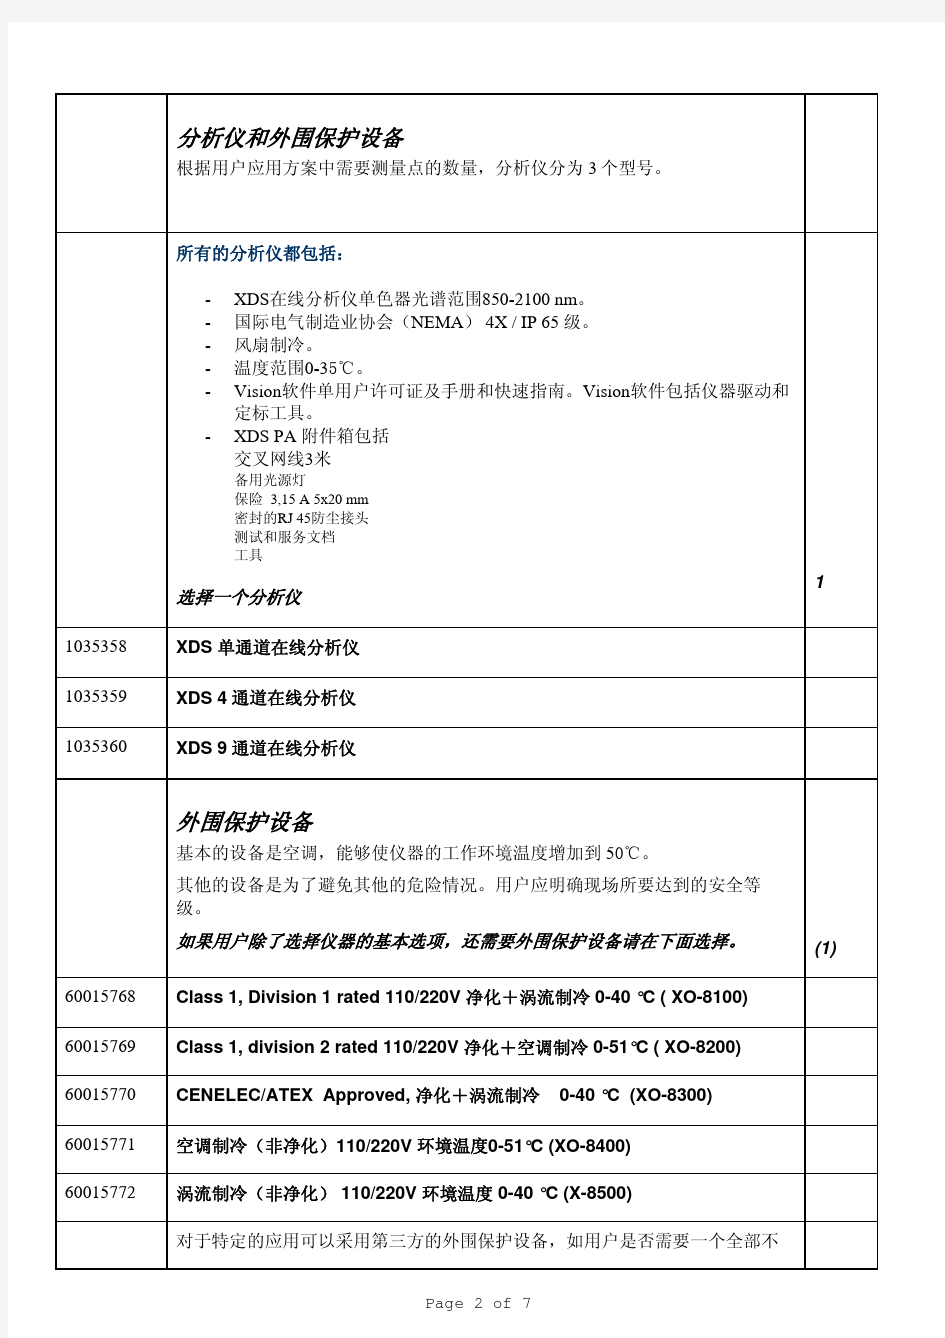 foss XDS PA在线配置资料